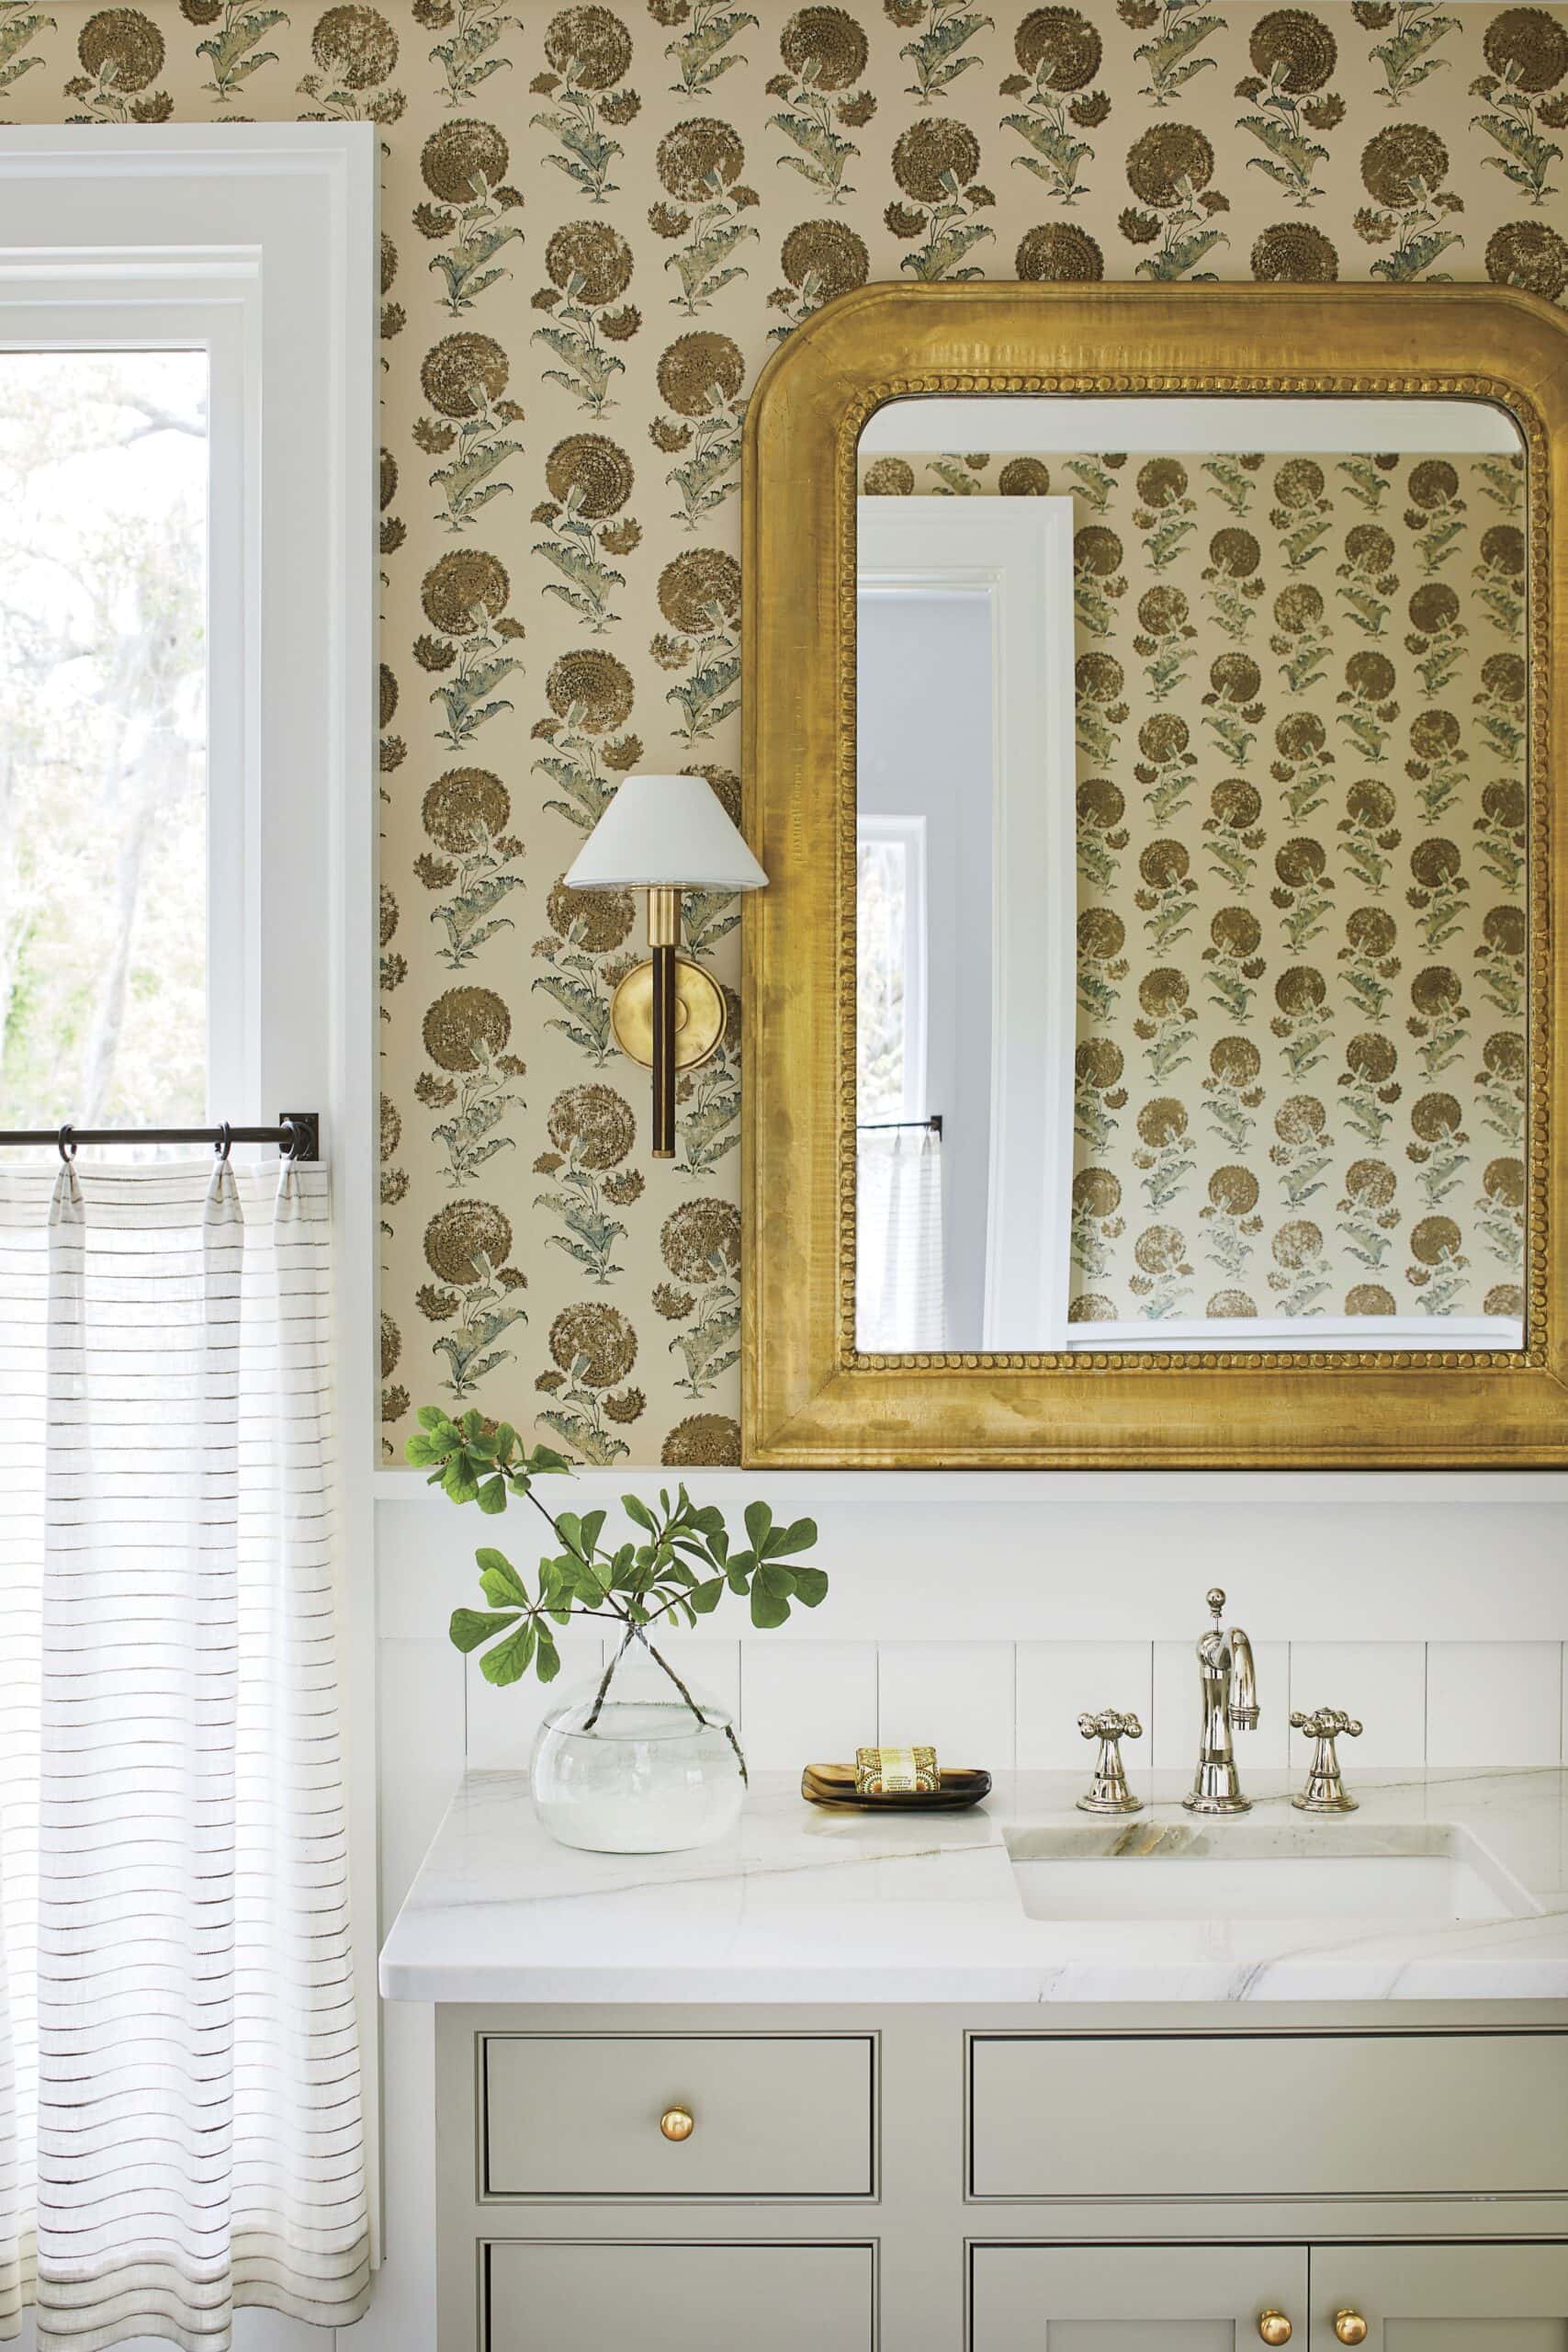 Beach style bathroom featured in home tour